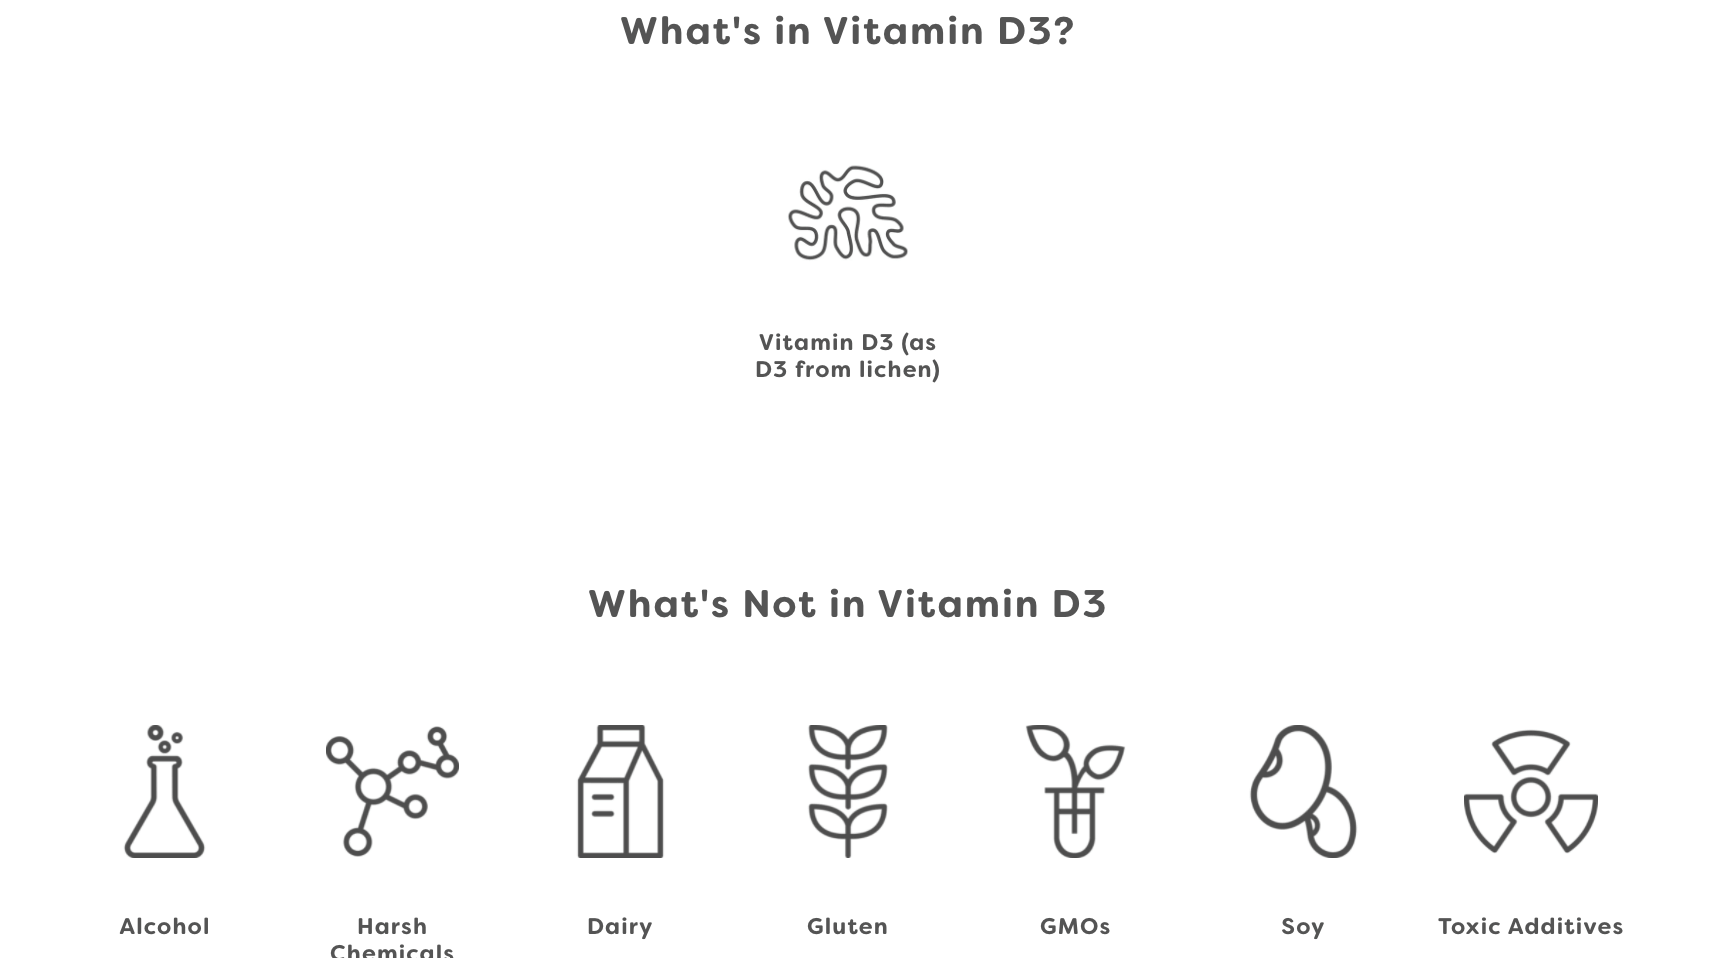 What's in Vitamin D3